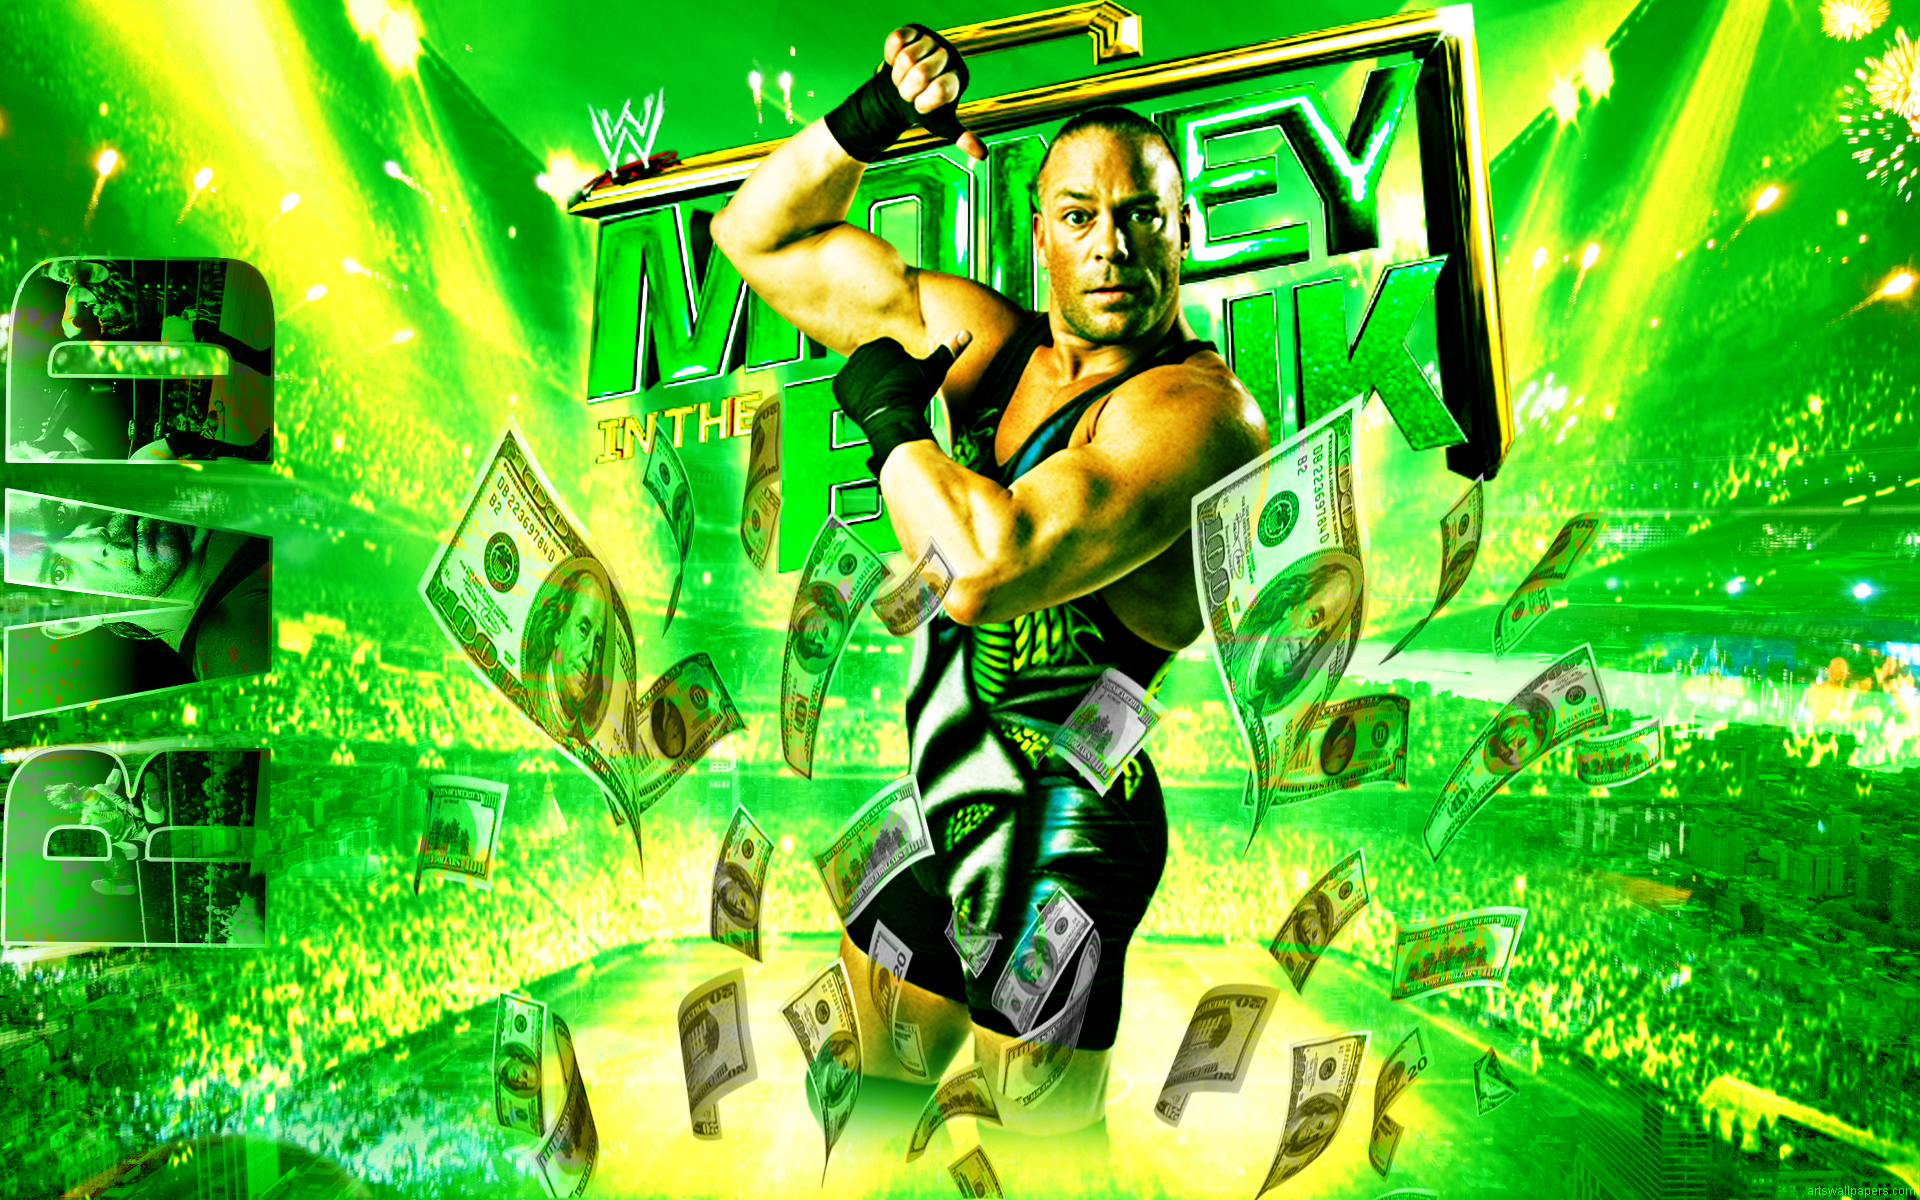 Rvd Returns Poster By Mikelshehata